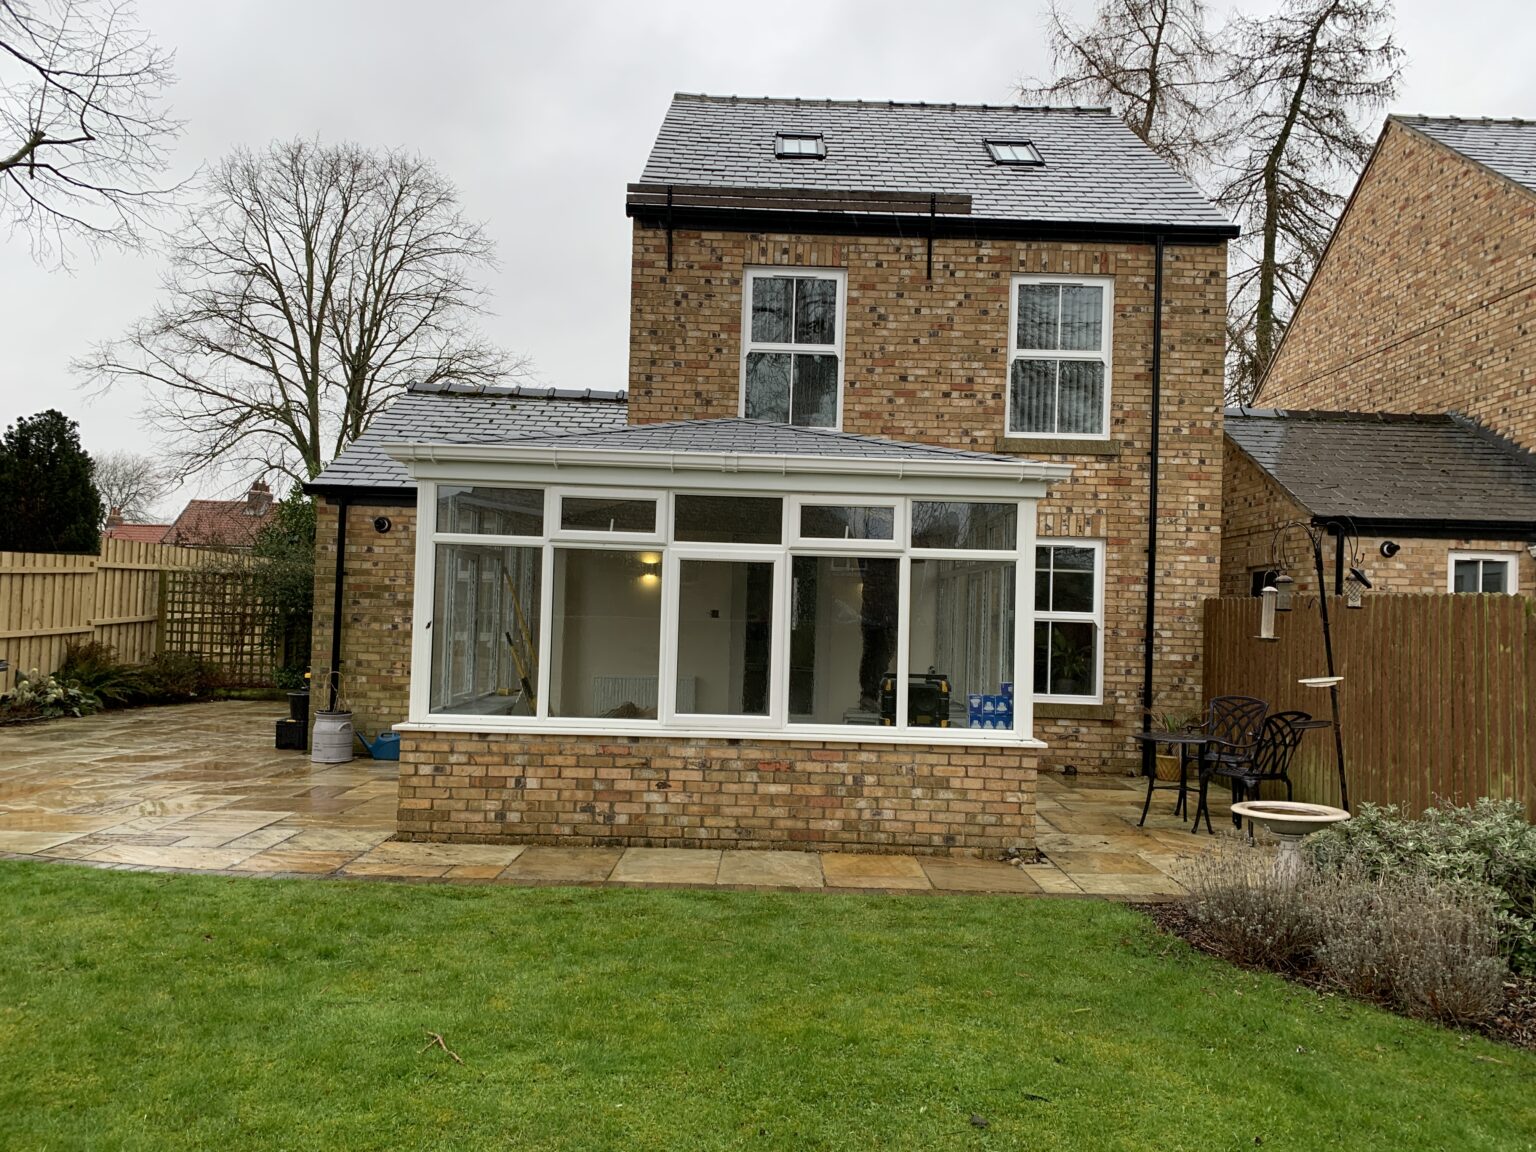 Conservatory roofs, conservatory, tiled conservatory roofs, insulated conservatory roofs, replacement conservatory roofs, conservatory roof replacement near me, roofing a conservatory, conservatory roof insulation,